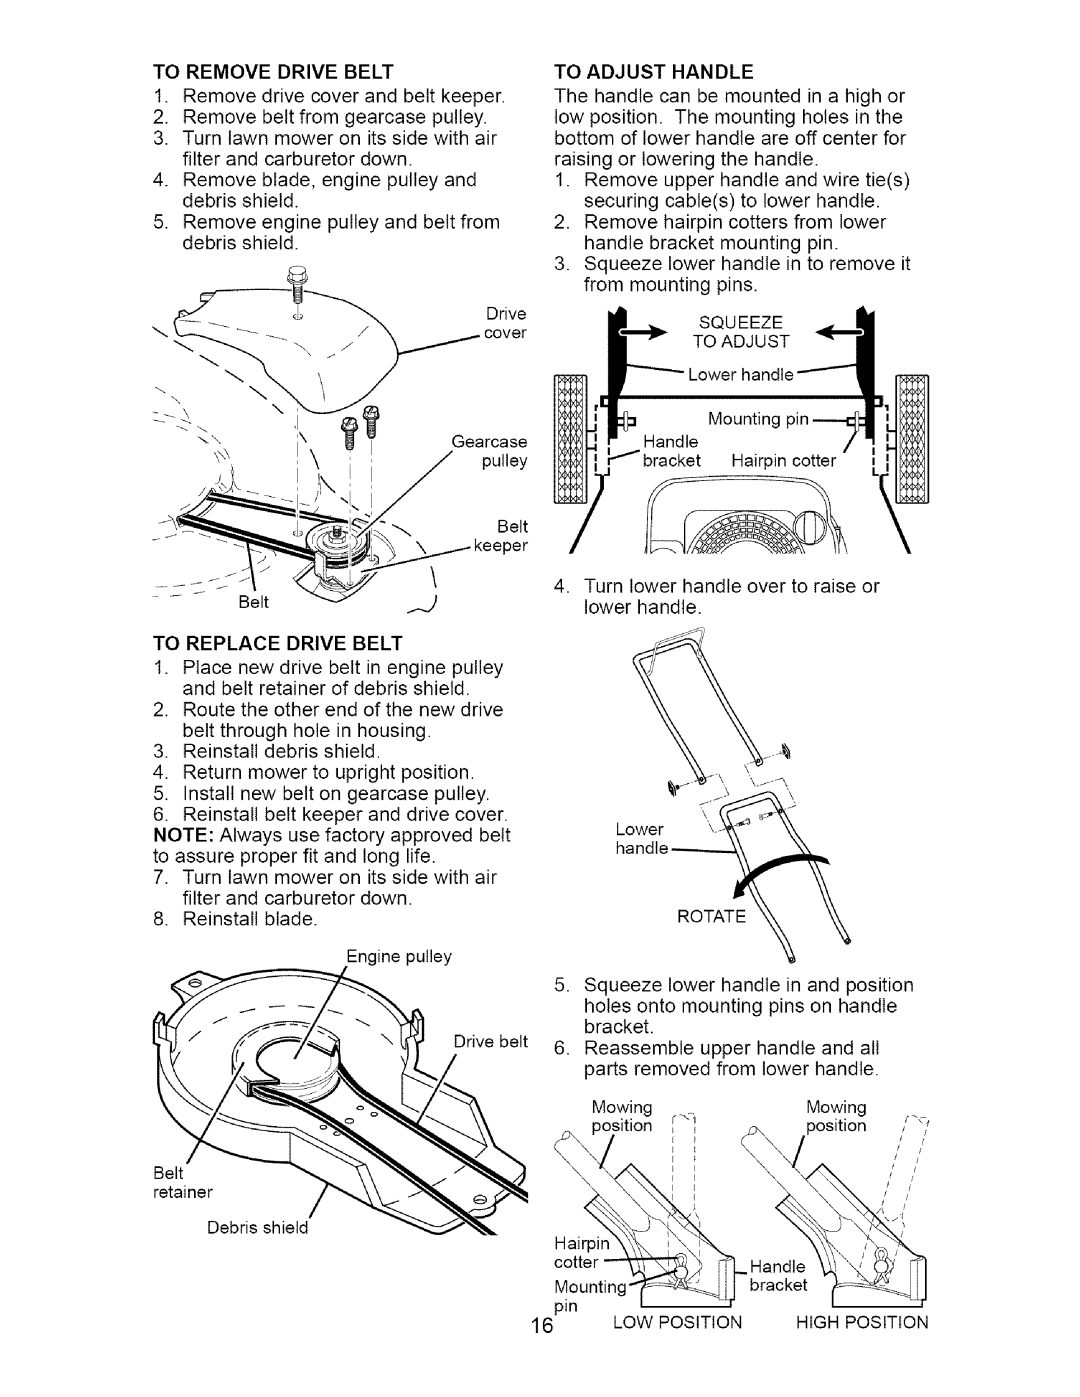 Craftsman 917.37172 Mount,ng, Turn lower handle over to raise or lower handle, To Remove Drive Belt, To Replace Drive Belt 